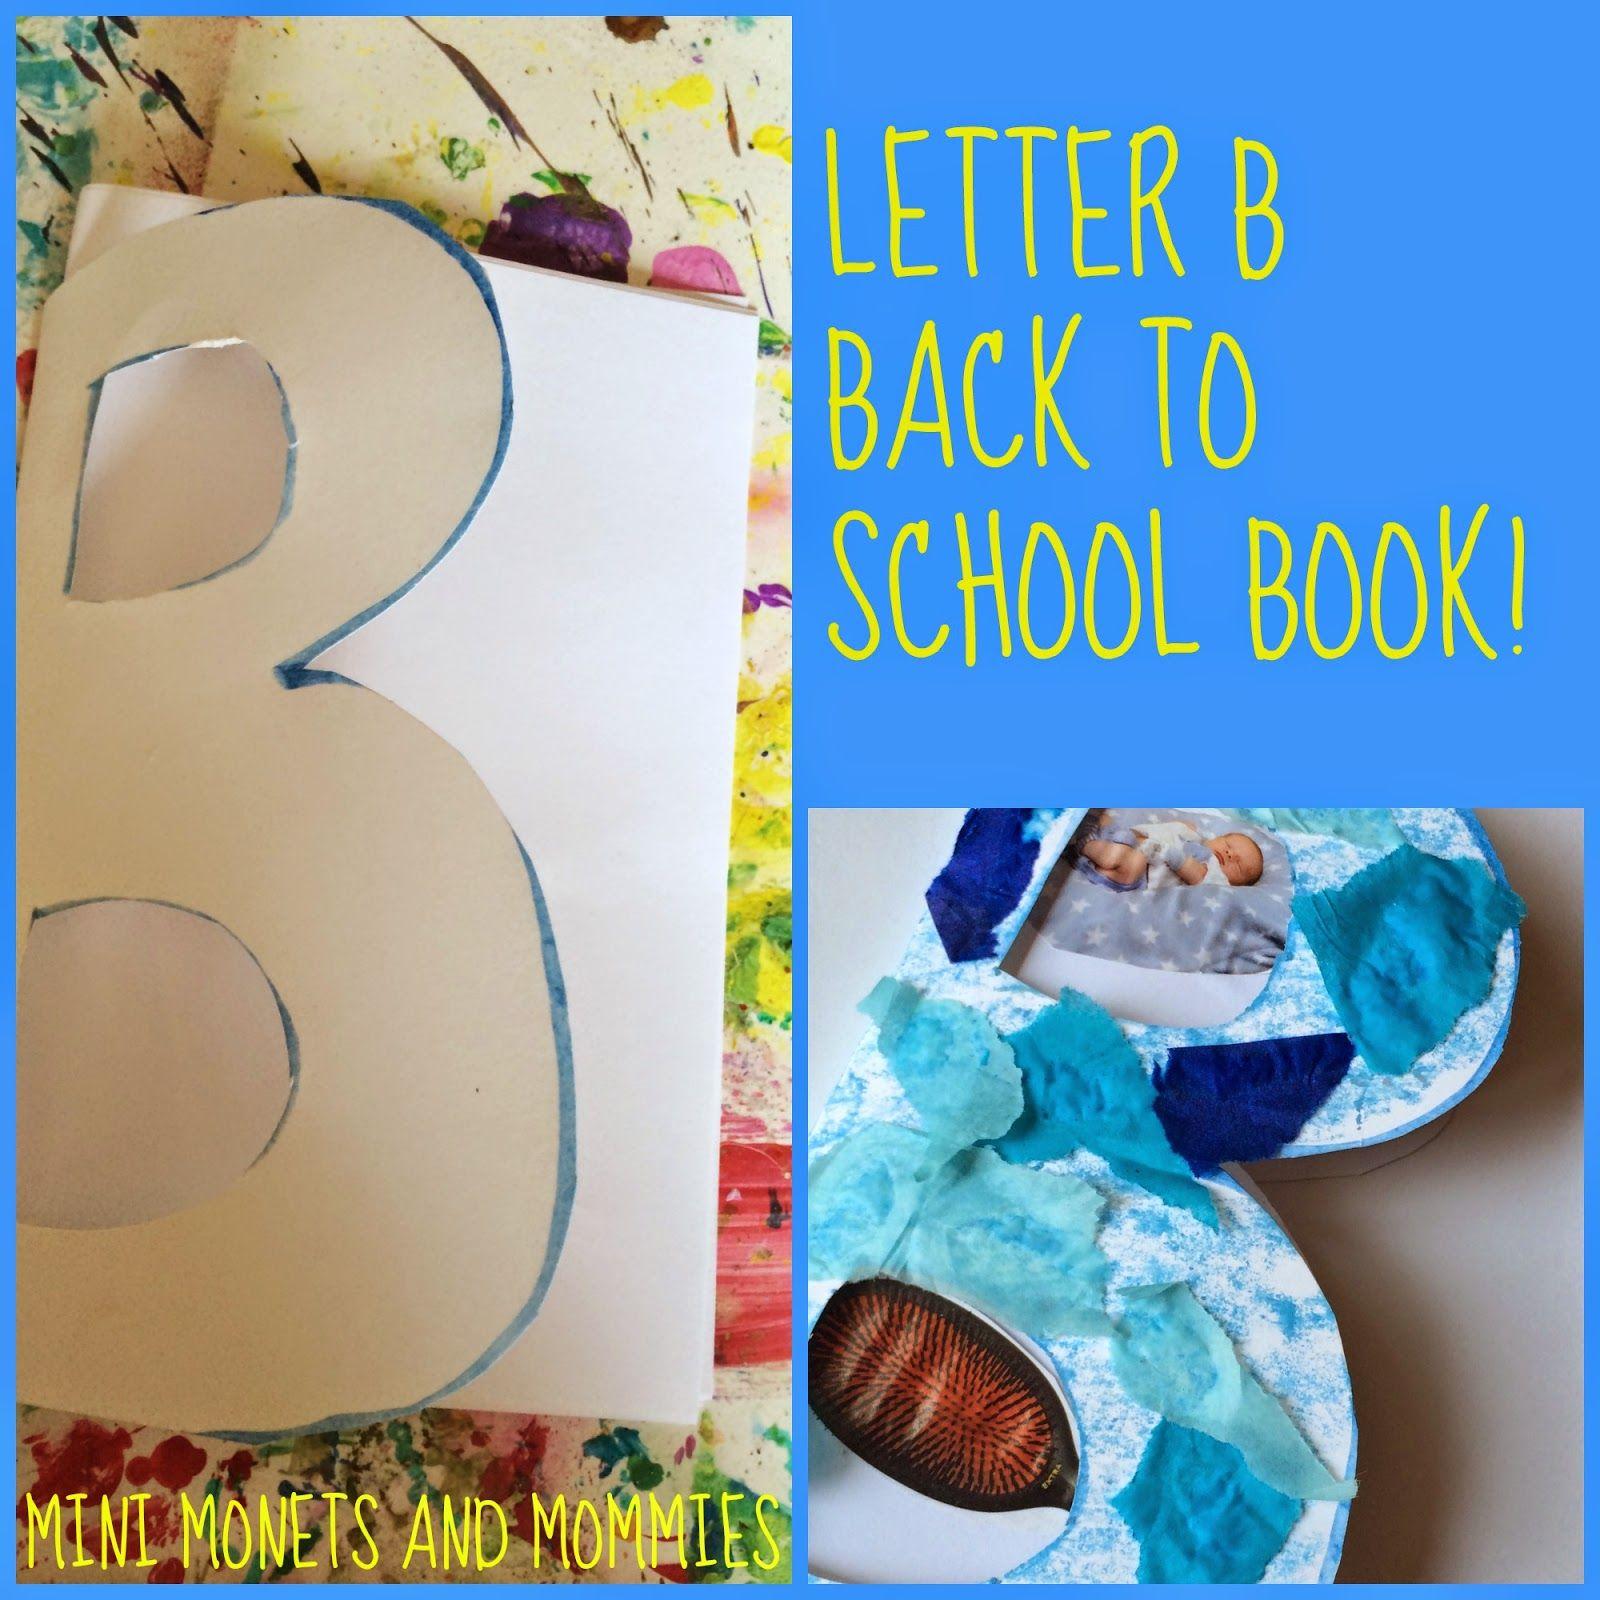 Back to Back Letter B Logo - Mini Monets and Mommies: Back to School Letter B Book Art Activity